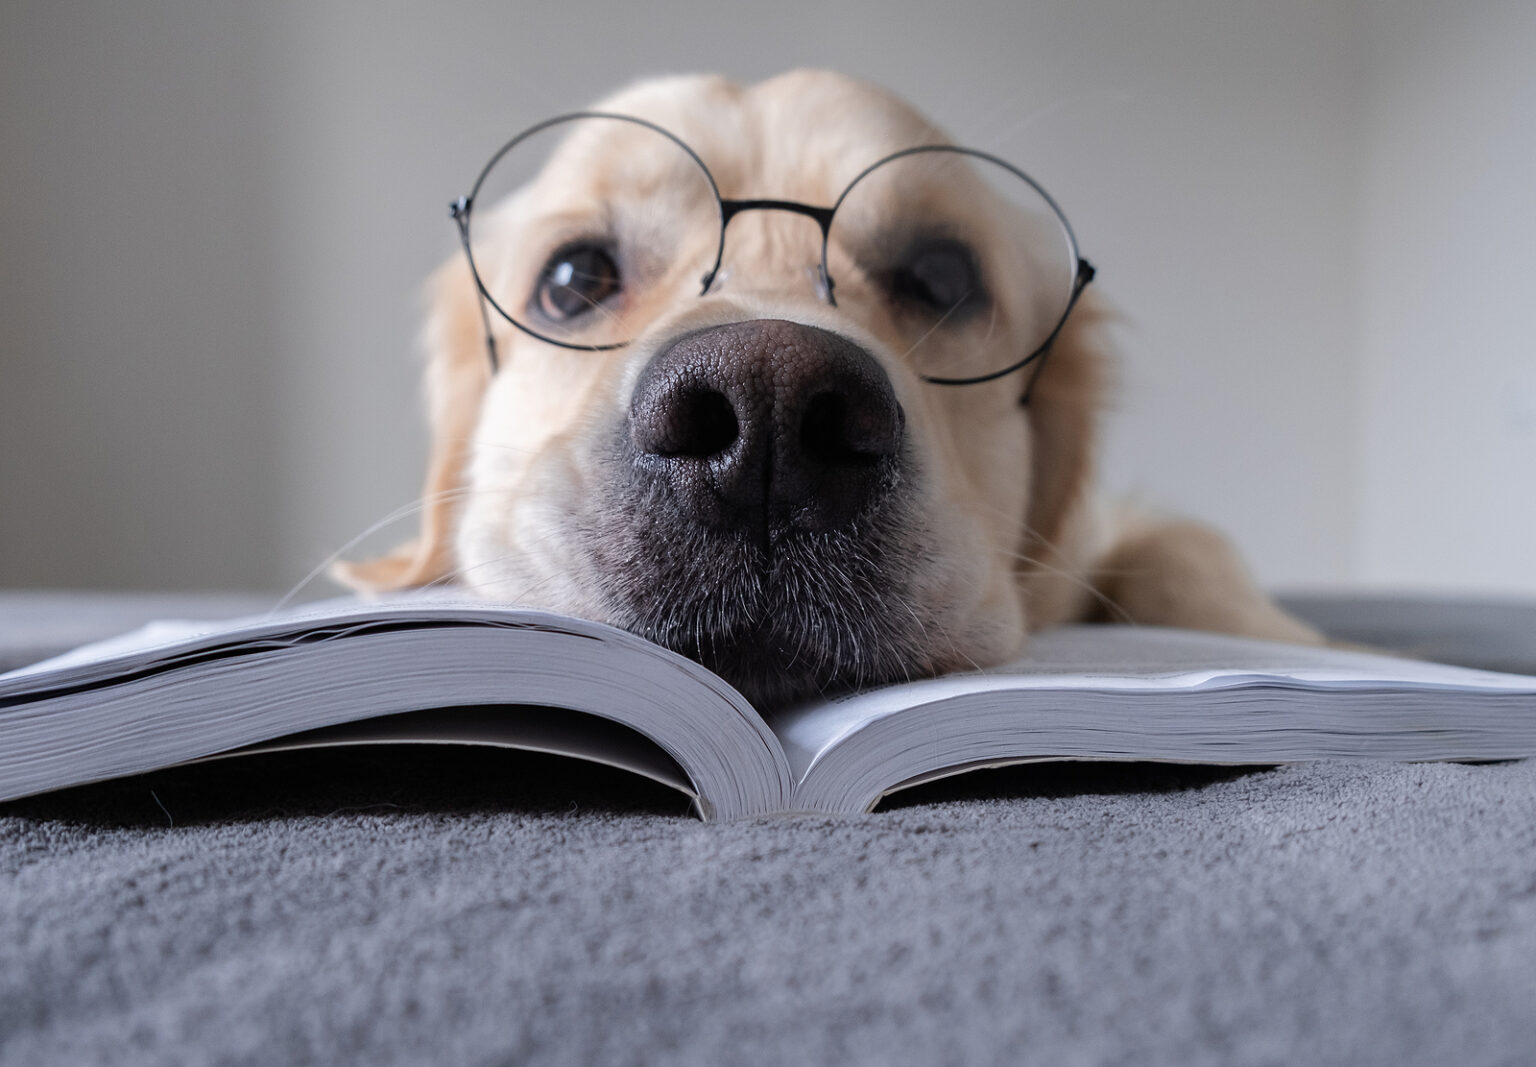 A Large Dog In Round Glasses Is Reading A Book. The Golden Retri